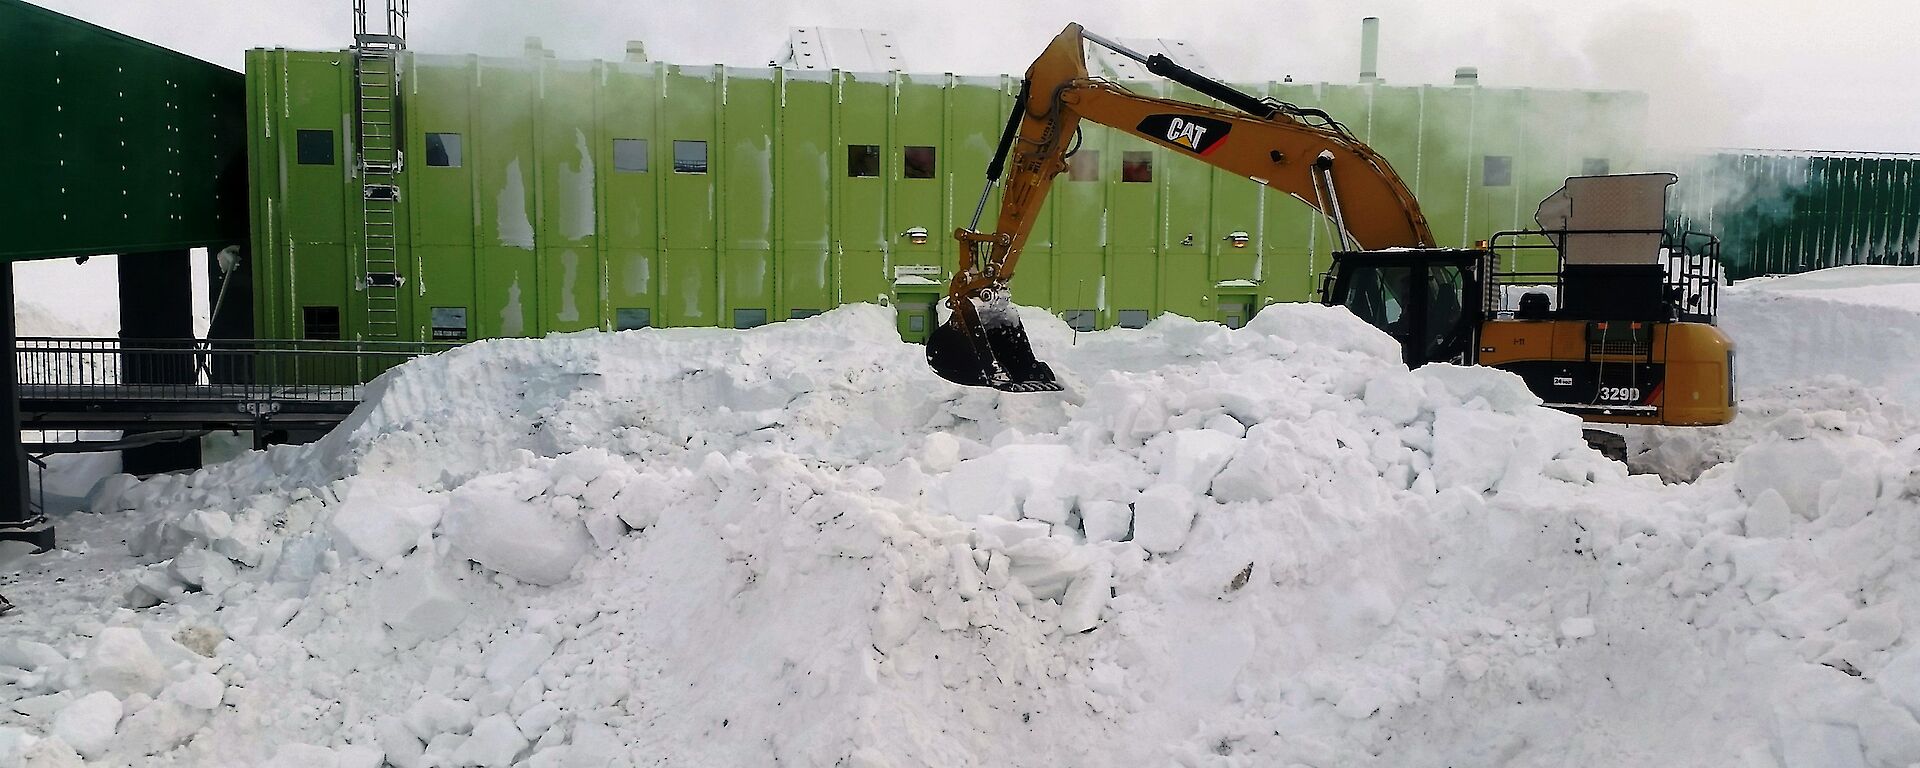 An excavator clears snow in foreground with a large green building in background